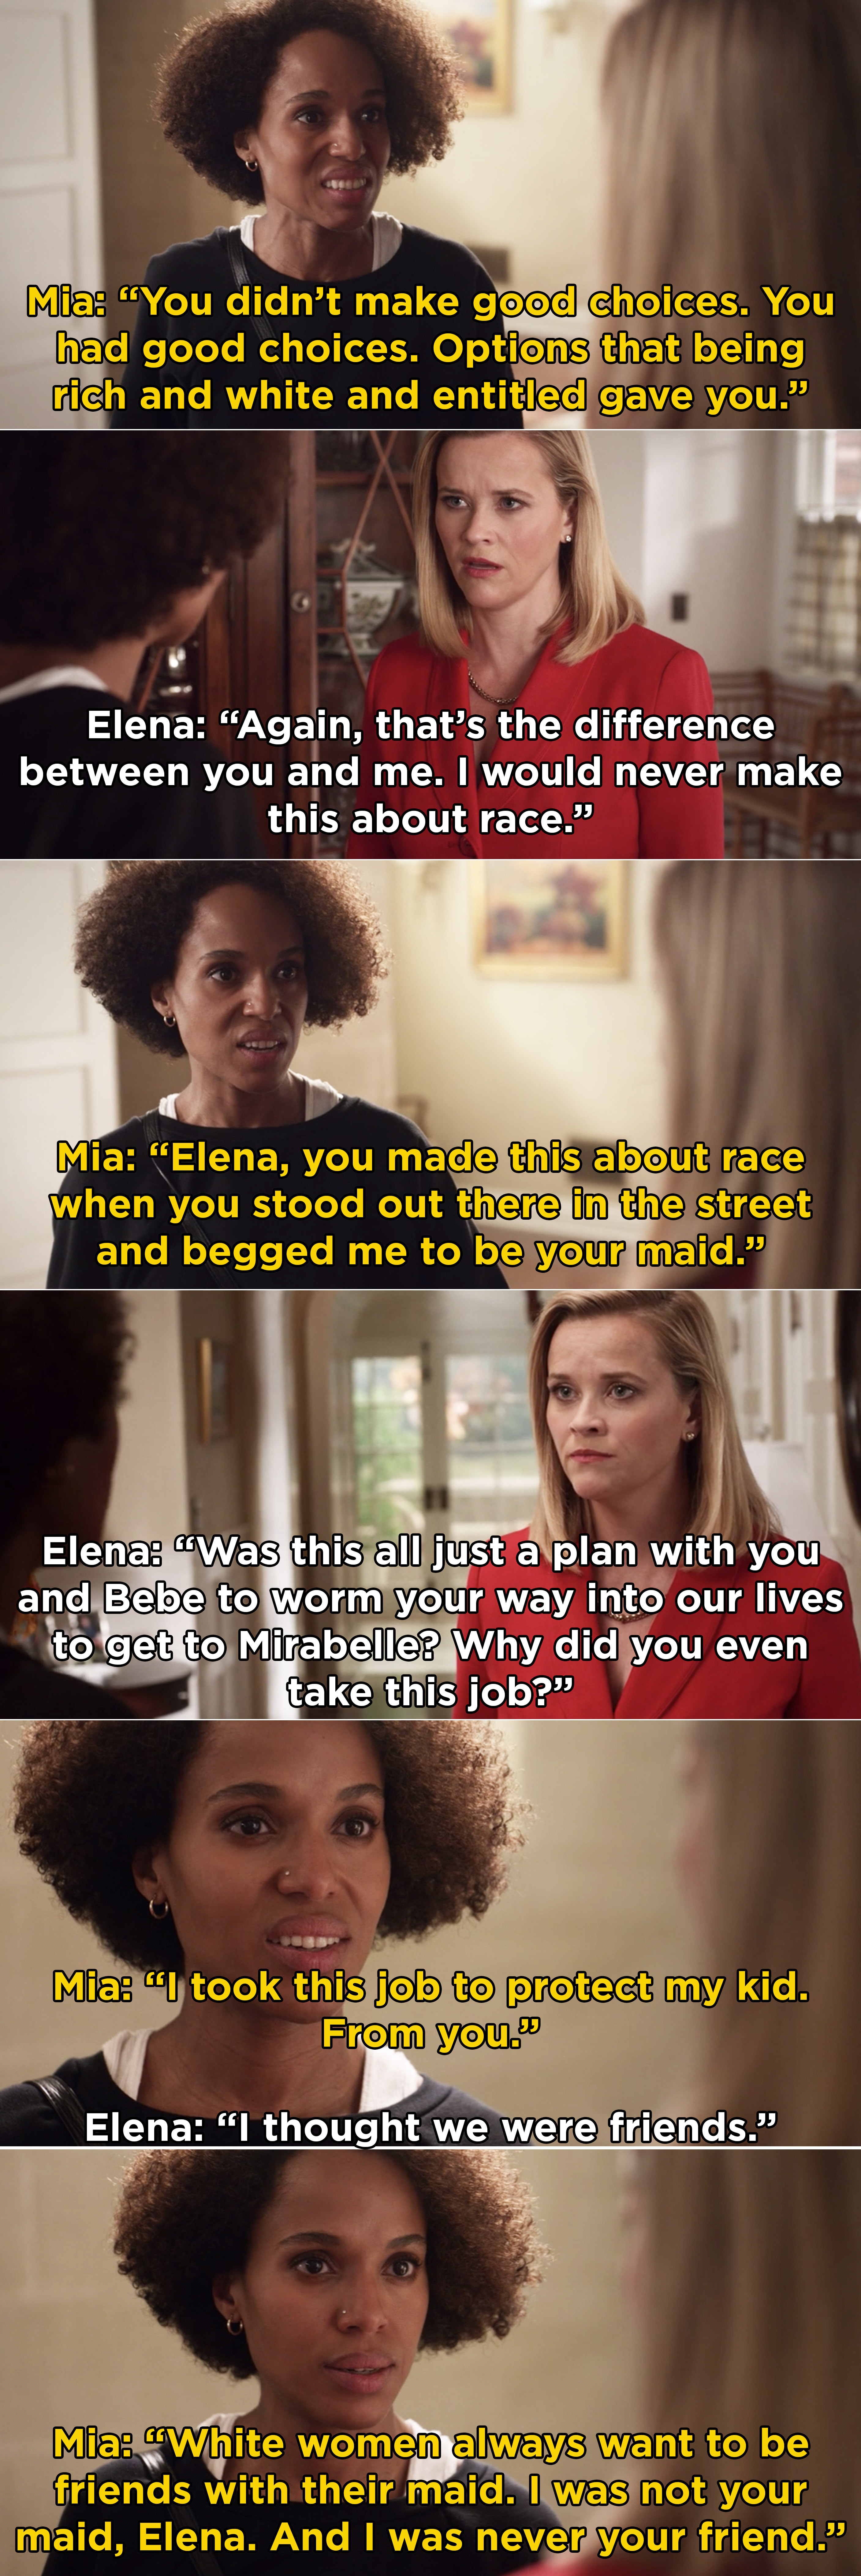 Mia telling Elena that she made this about race when Elena asked her to &quot;be her maid&quot;